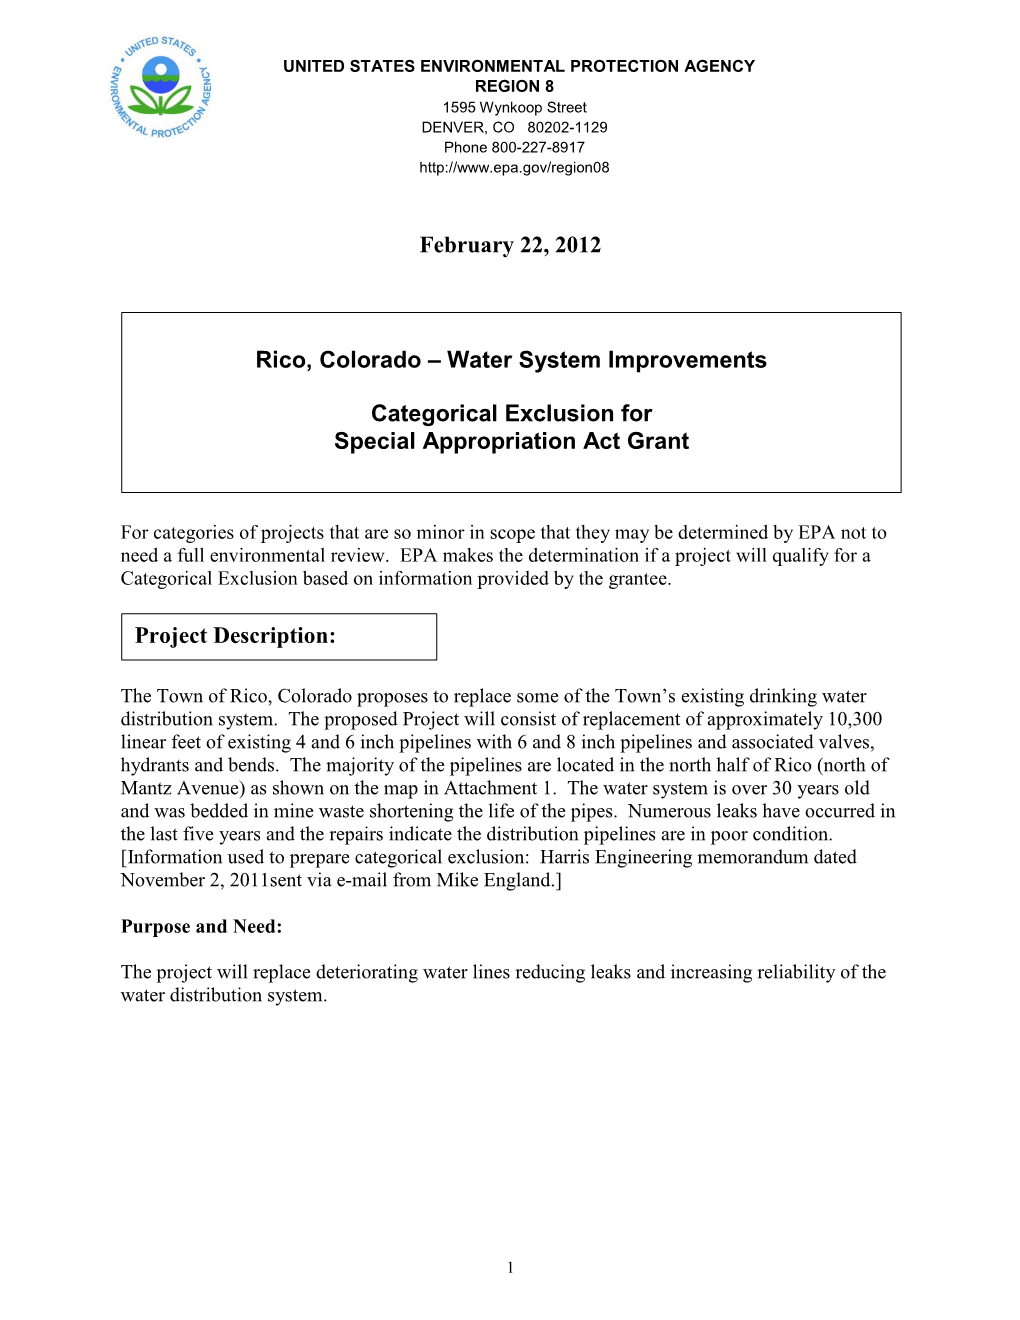 Rico, Co Categorical Exclusion Waterline Replacement Project